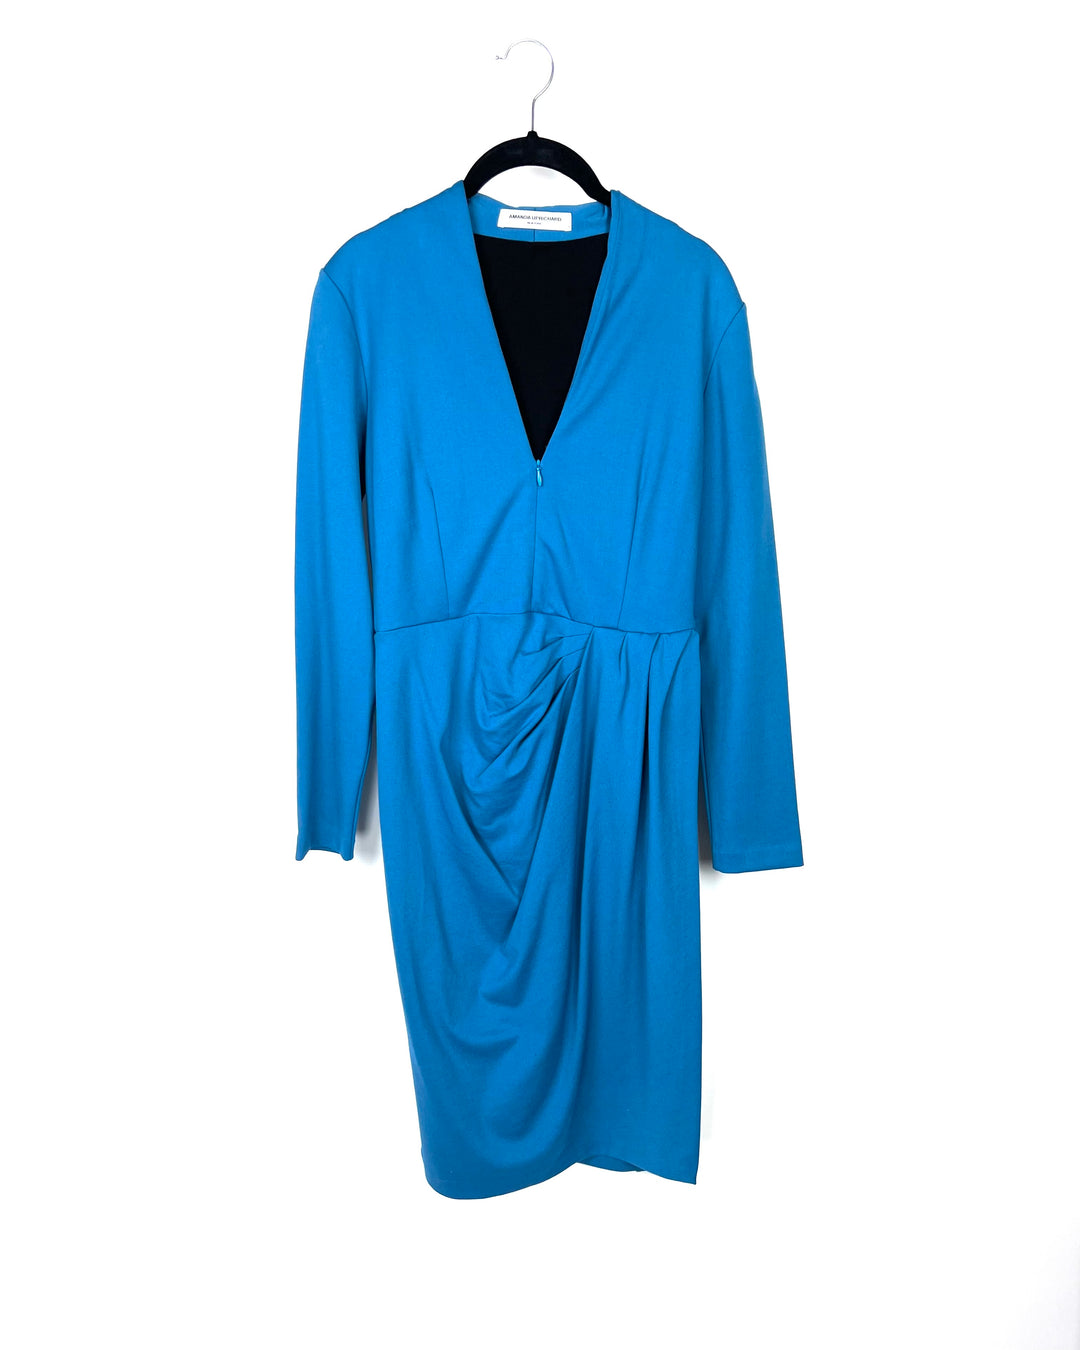 Teal Long-Sleeved Dress - Size 4-6